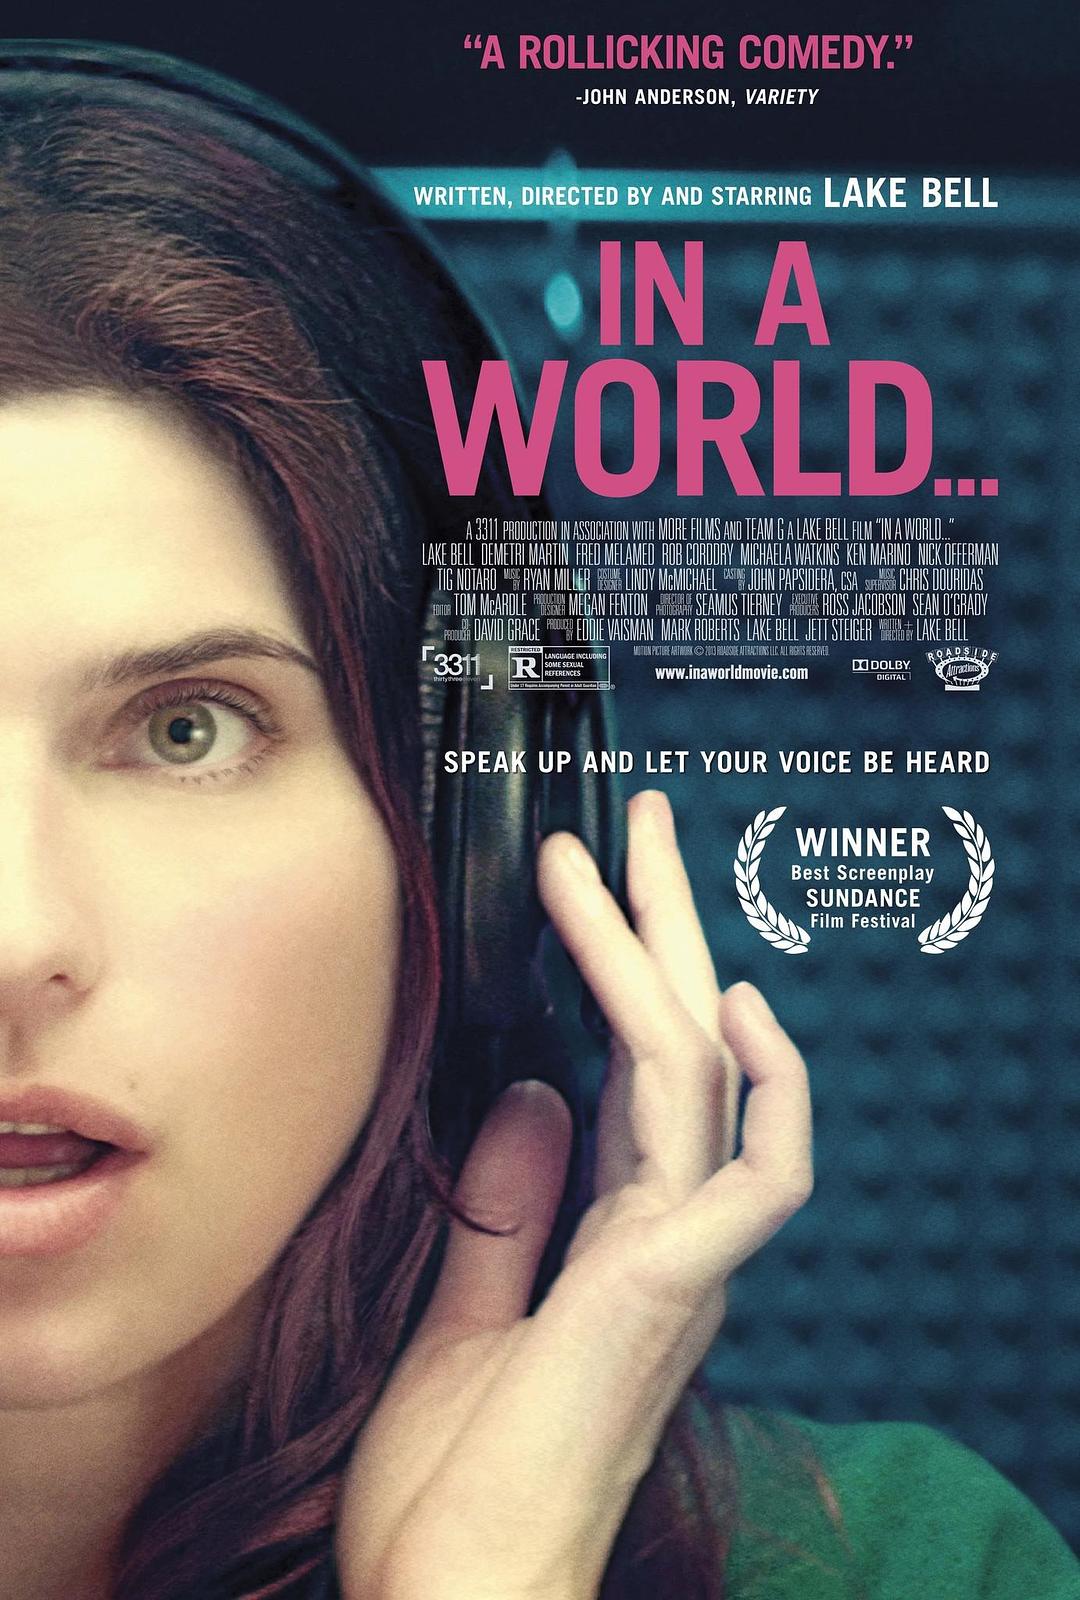 / In.A.World.2013.LiMiTED.1080p.BluRay.x264-iMMORTALs 6.56GB-1.png